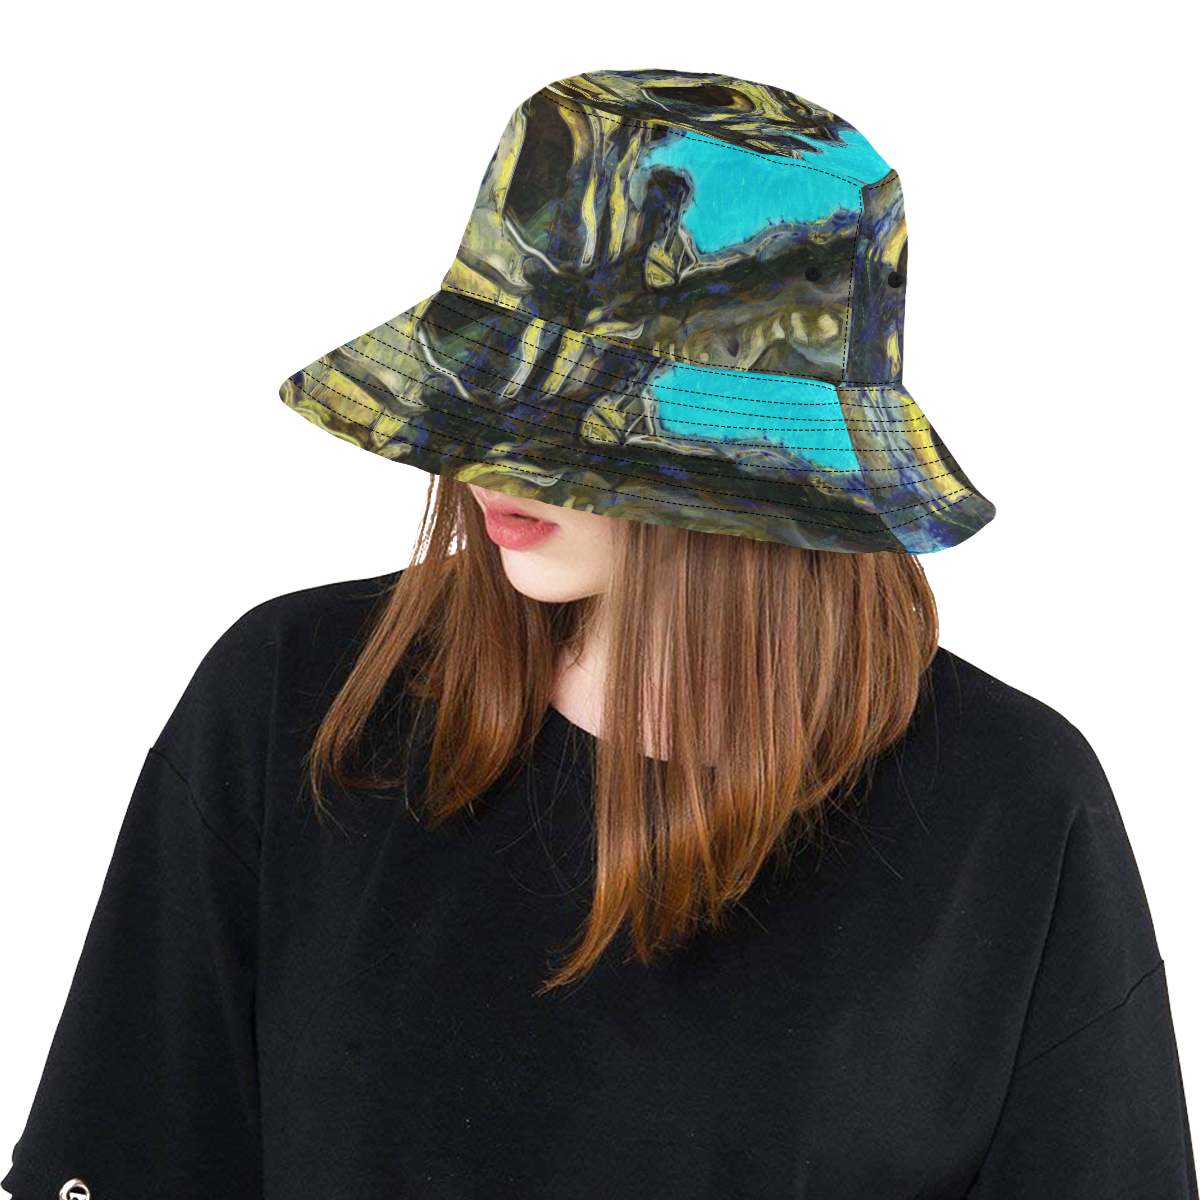 Church Bell Tower Dresden Germany KPA All Over Print Bucket Hat